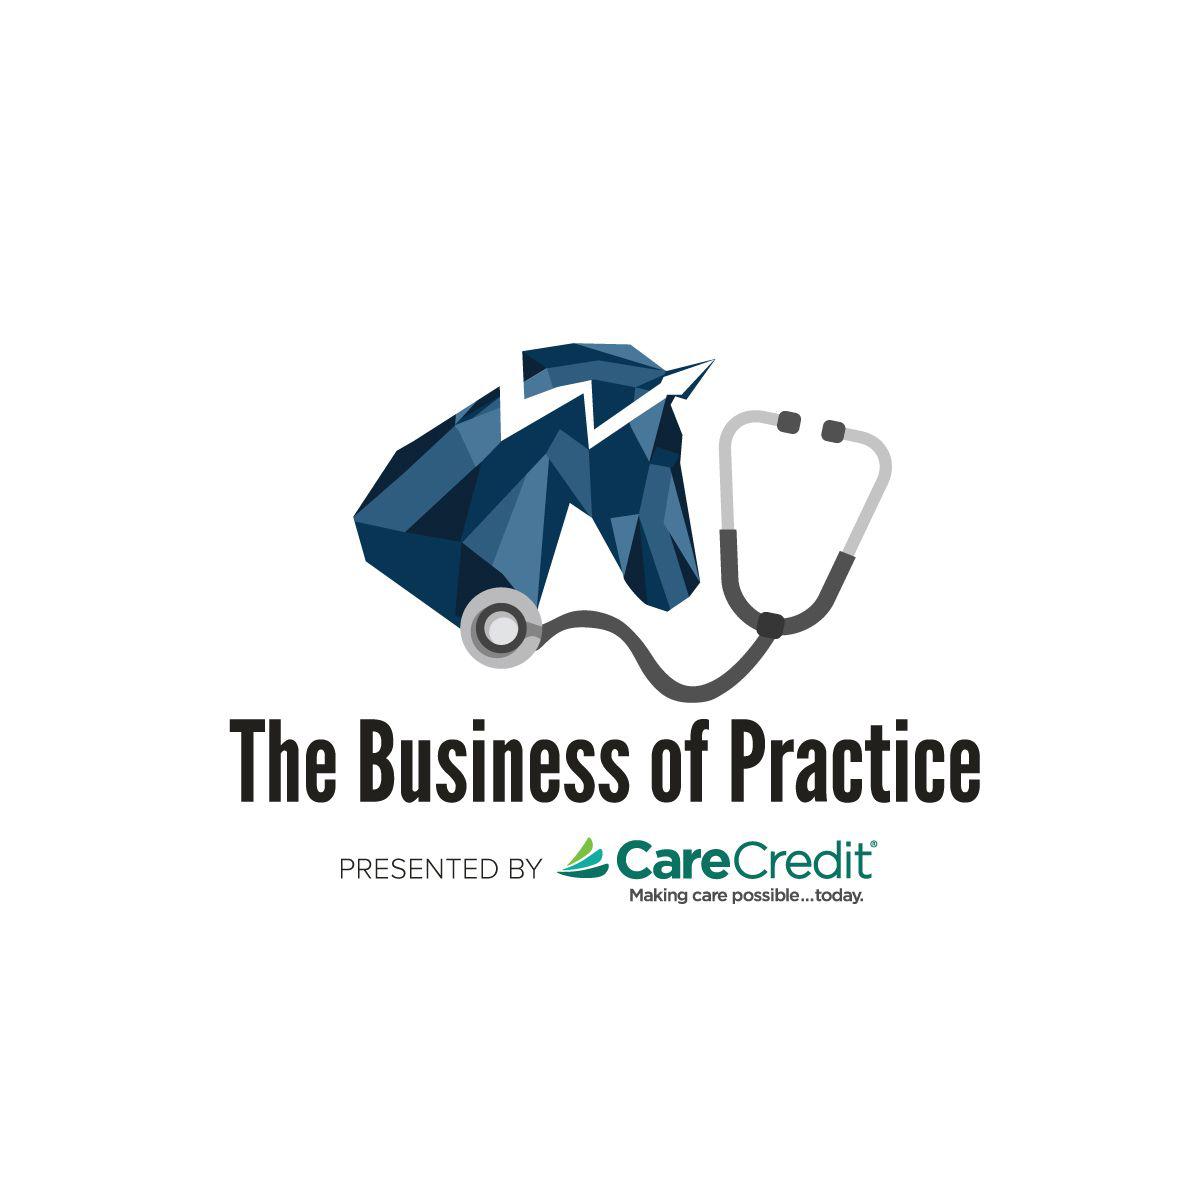 The Business of Practice